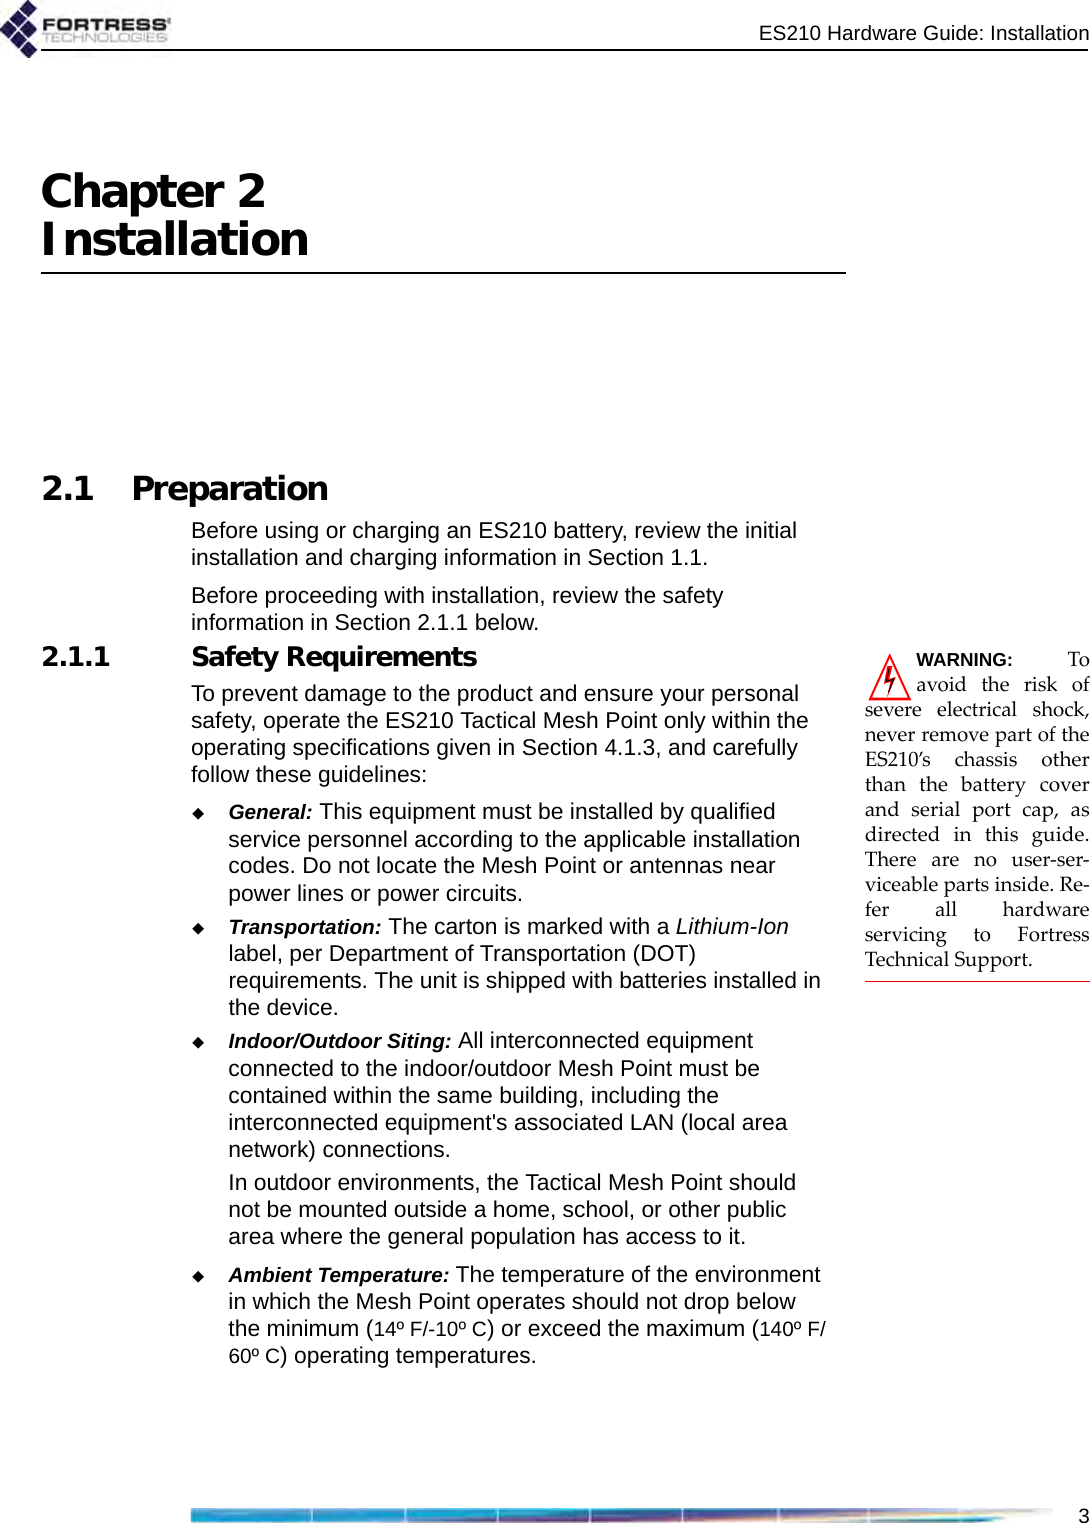 ES210 Hardware Guide: Installation3Chapter 2Installation2.1 PreparationBefore using or charging an ES210 battery, review the initial installation and charging information in Section 1.1.Before proceeding with installation, review the safety information in Section 2.1.1 below. WARNING: Toavoid the risk ofsevere electrical shock,never remove part of theES210’s chassis otherthan the battery coverand serial port cap, asdirected in this guide.There are no user-ser-viceable parts inside. Re-fer all hardwareservicing to FortressTechnical Support.2.1.1 Safety RequirementsTo prevent damage to the product and ensure your personal safety, operate the ES210 Tactical Mesh Point only within the operating specifications given in Section 4.1.3, and carefully follow these guidelines: General: This equipment must be installed by qualified service personnel according to the applicable installation codes. Do not locate the Mesh Point or antennas near power lines or power circuits.Transportation: The carton is marked with a Lithium-Ion label, per Department of Transportation (DOT) requirements. The unit is shipped with batteries installed in the device.Indoor/Outdoor Siting: All interconnected equipment connected to the indoor/outdoor Mesh Point must be contained within the same building, including the interconnected equipment&apos;s associated LAN (local area network) connections.In outdoor environments, the Tactical Mesh Point should not be mounted outside a home, school, or other public area where the general population has access to it. Ambient Temperature: The temperature of the environment in which the Mesh Point operates should not drop below the minimum (14º F/-10º C) or exceed the maximum (140º F/60º C) operating temperatures. 